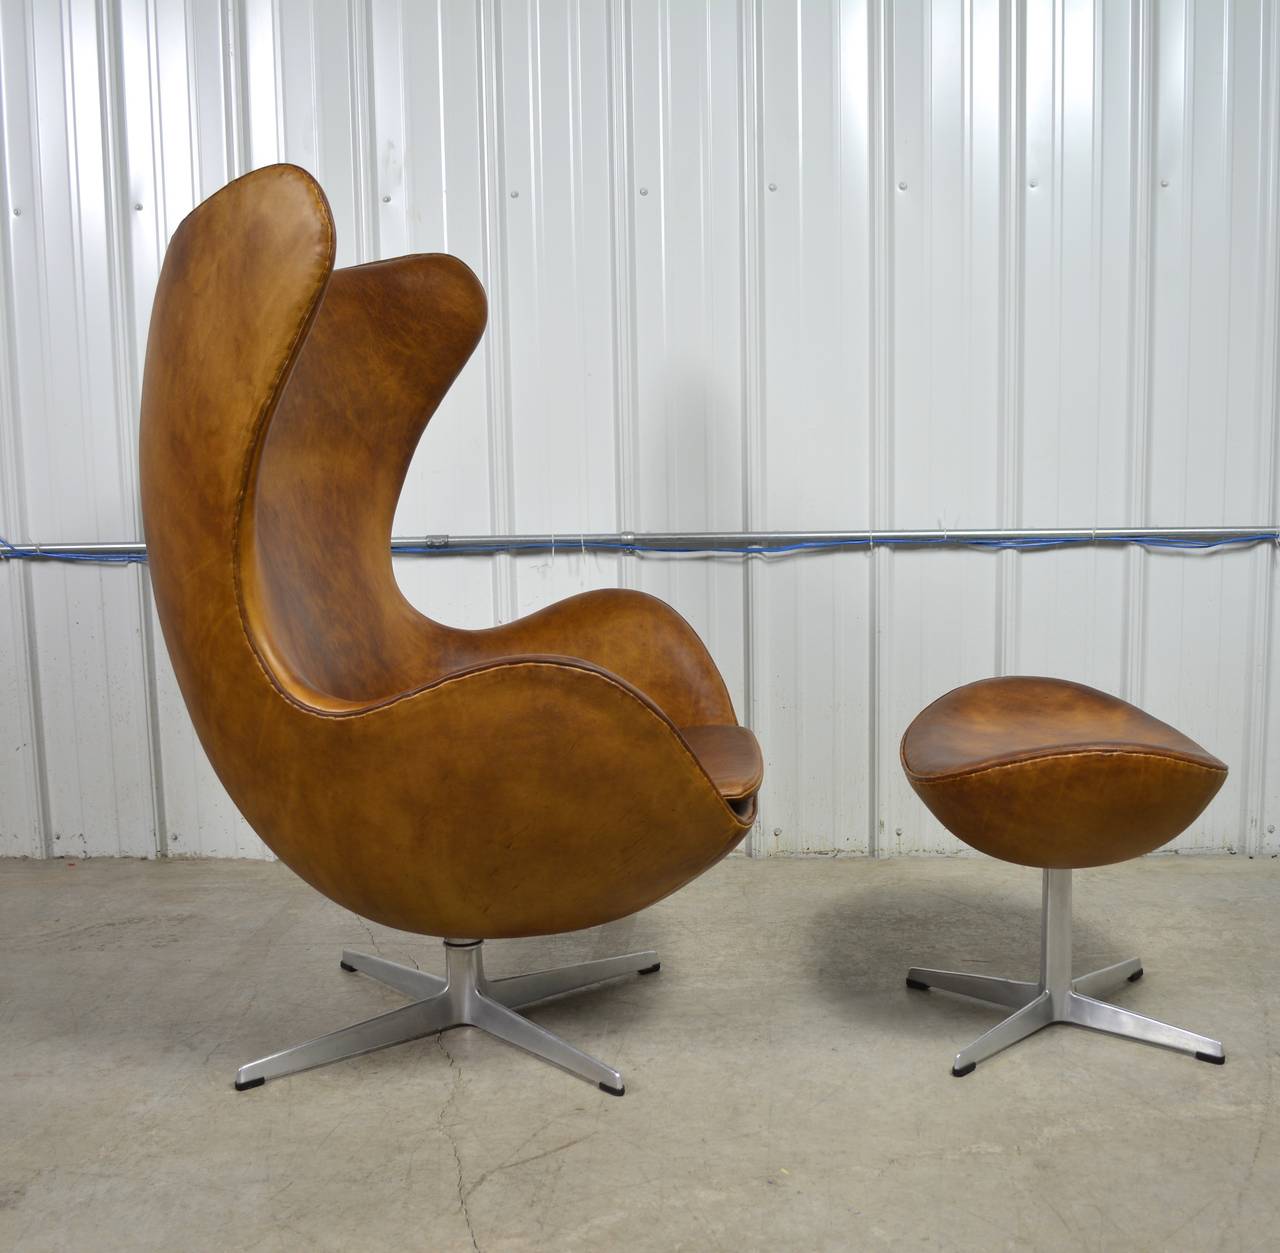 Egg chair and ottoman designed by Arne Jacobsen. This set dates to 1966. Tan leather upholstery shows great character. Both pieces are labeled.